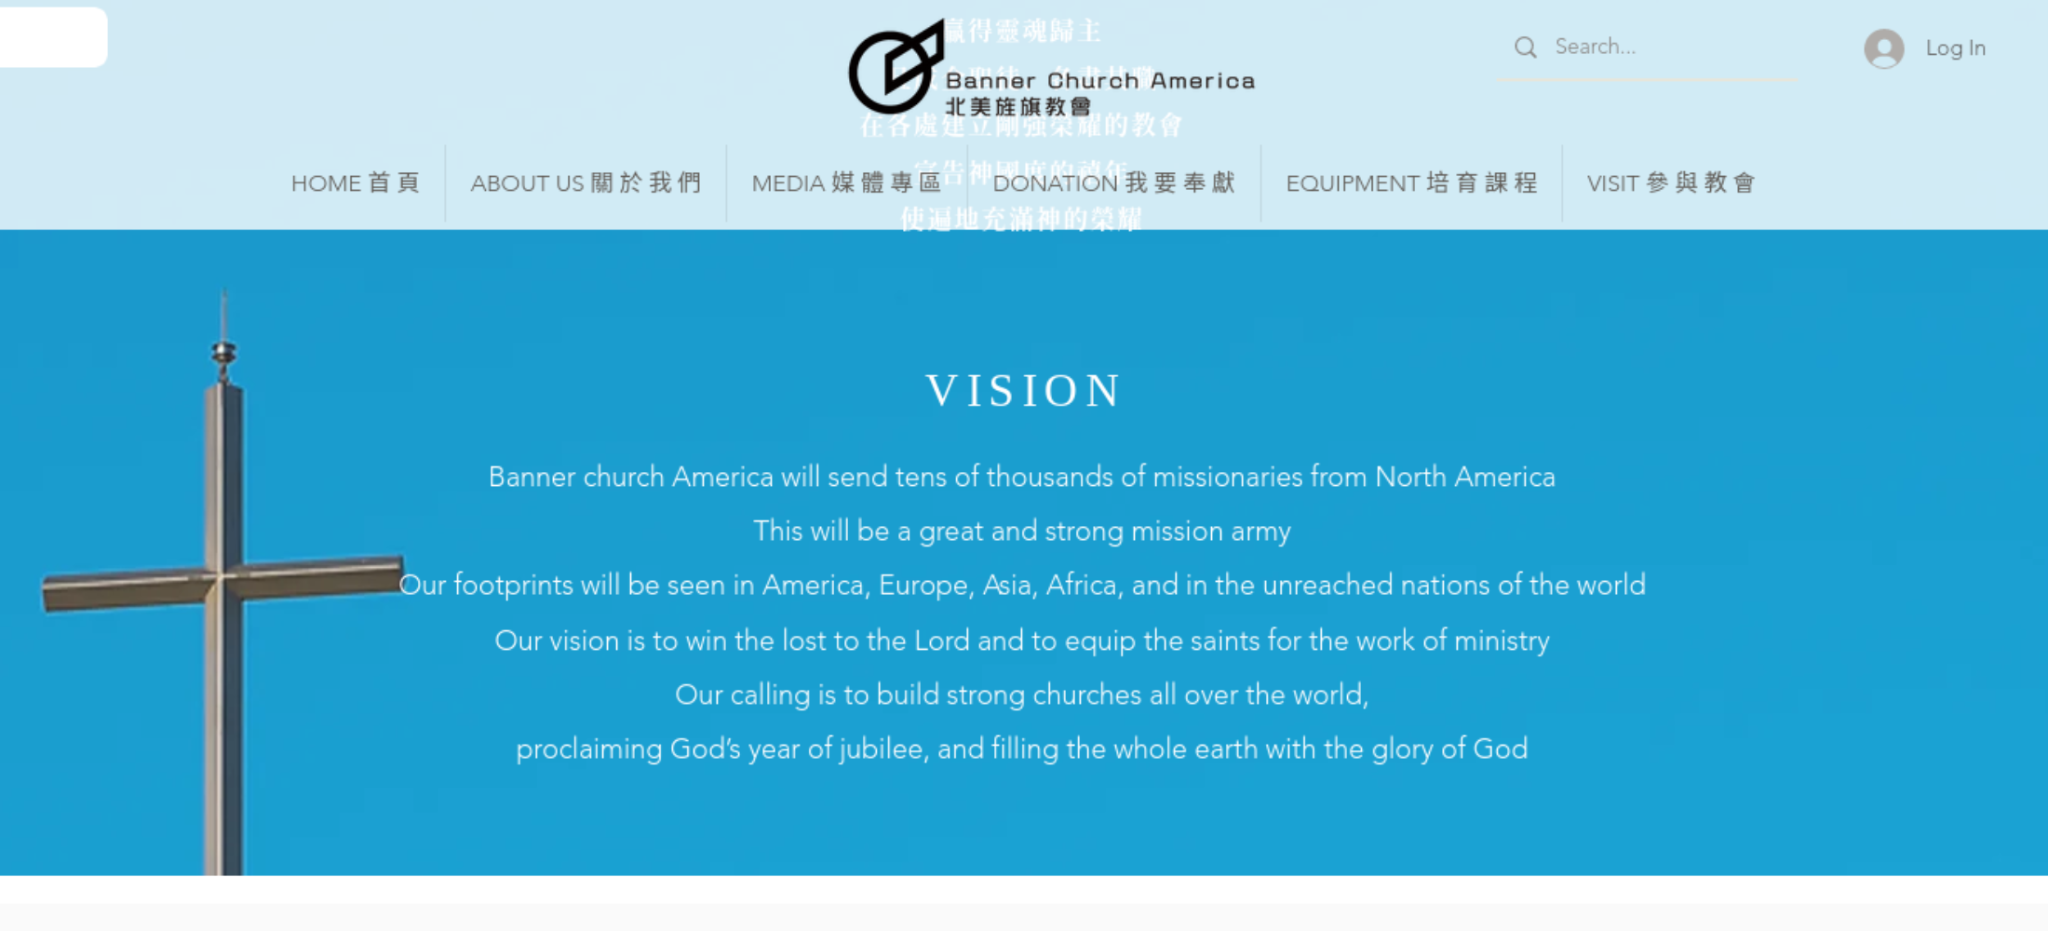 Screenshot of Banner Church America's website showing their vision statement. 